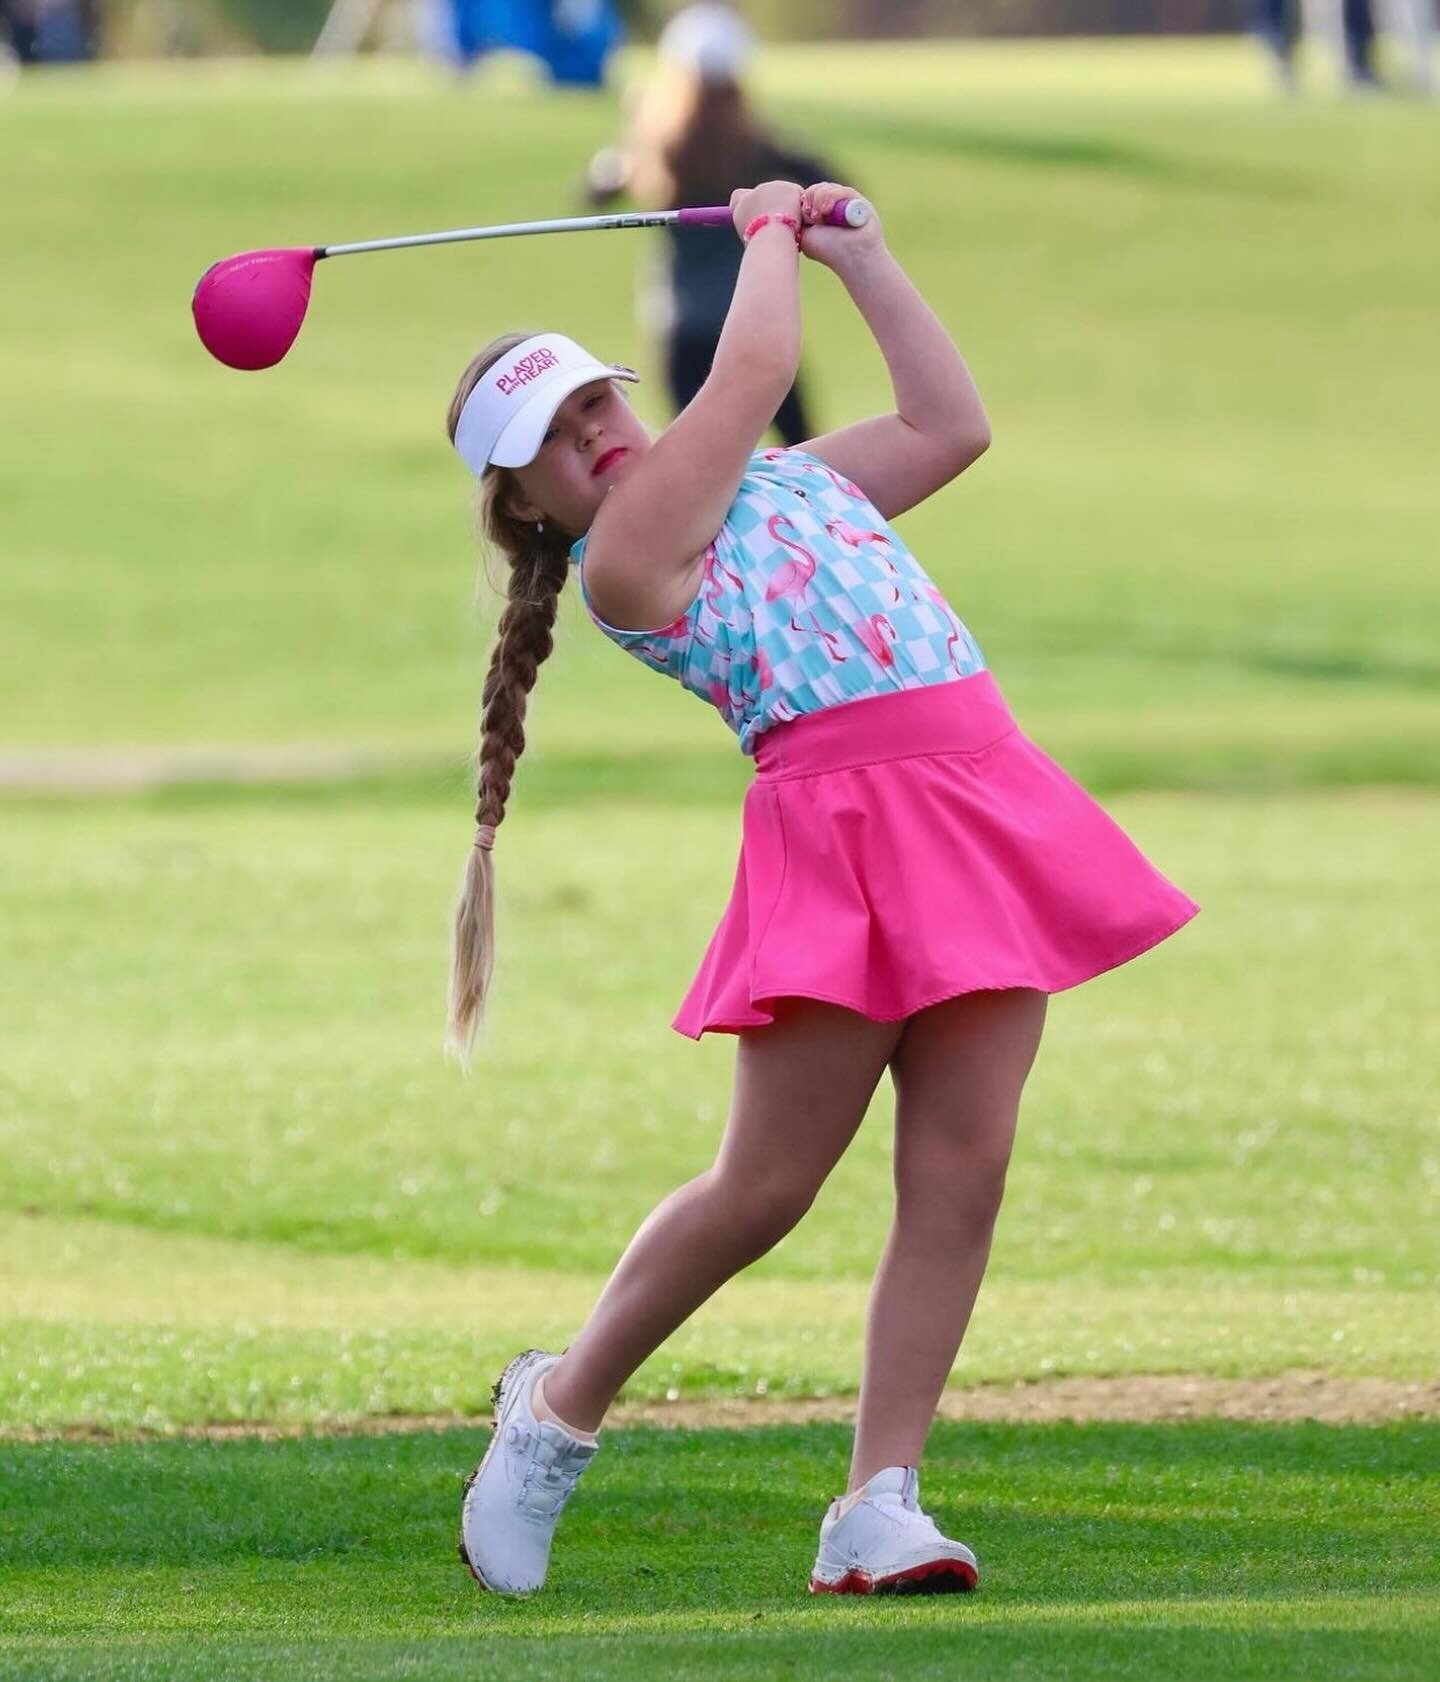 All PINK everything!!!😍🩷💕Even down to the lipstick💄💋 and we&rsquo;re here for it 1000% !!✨ #golfgirl #playwithheart #prettyinpink